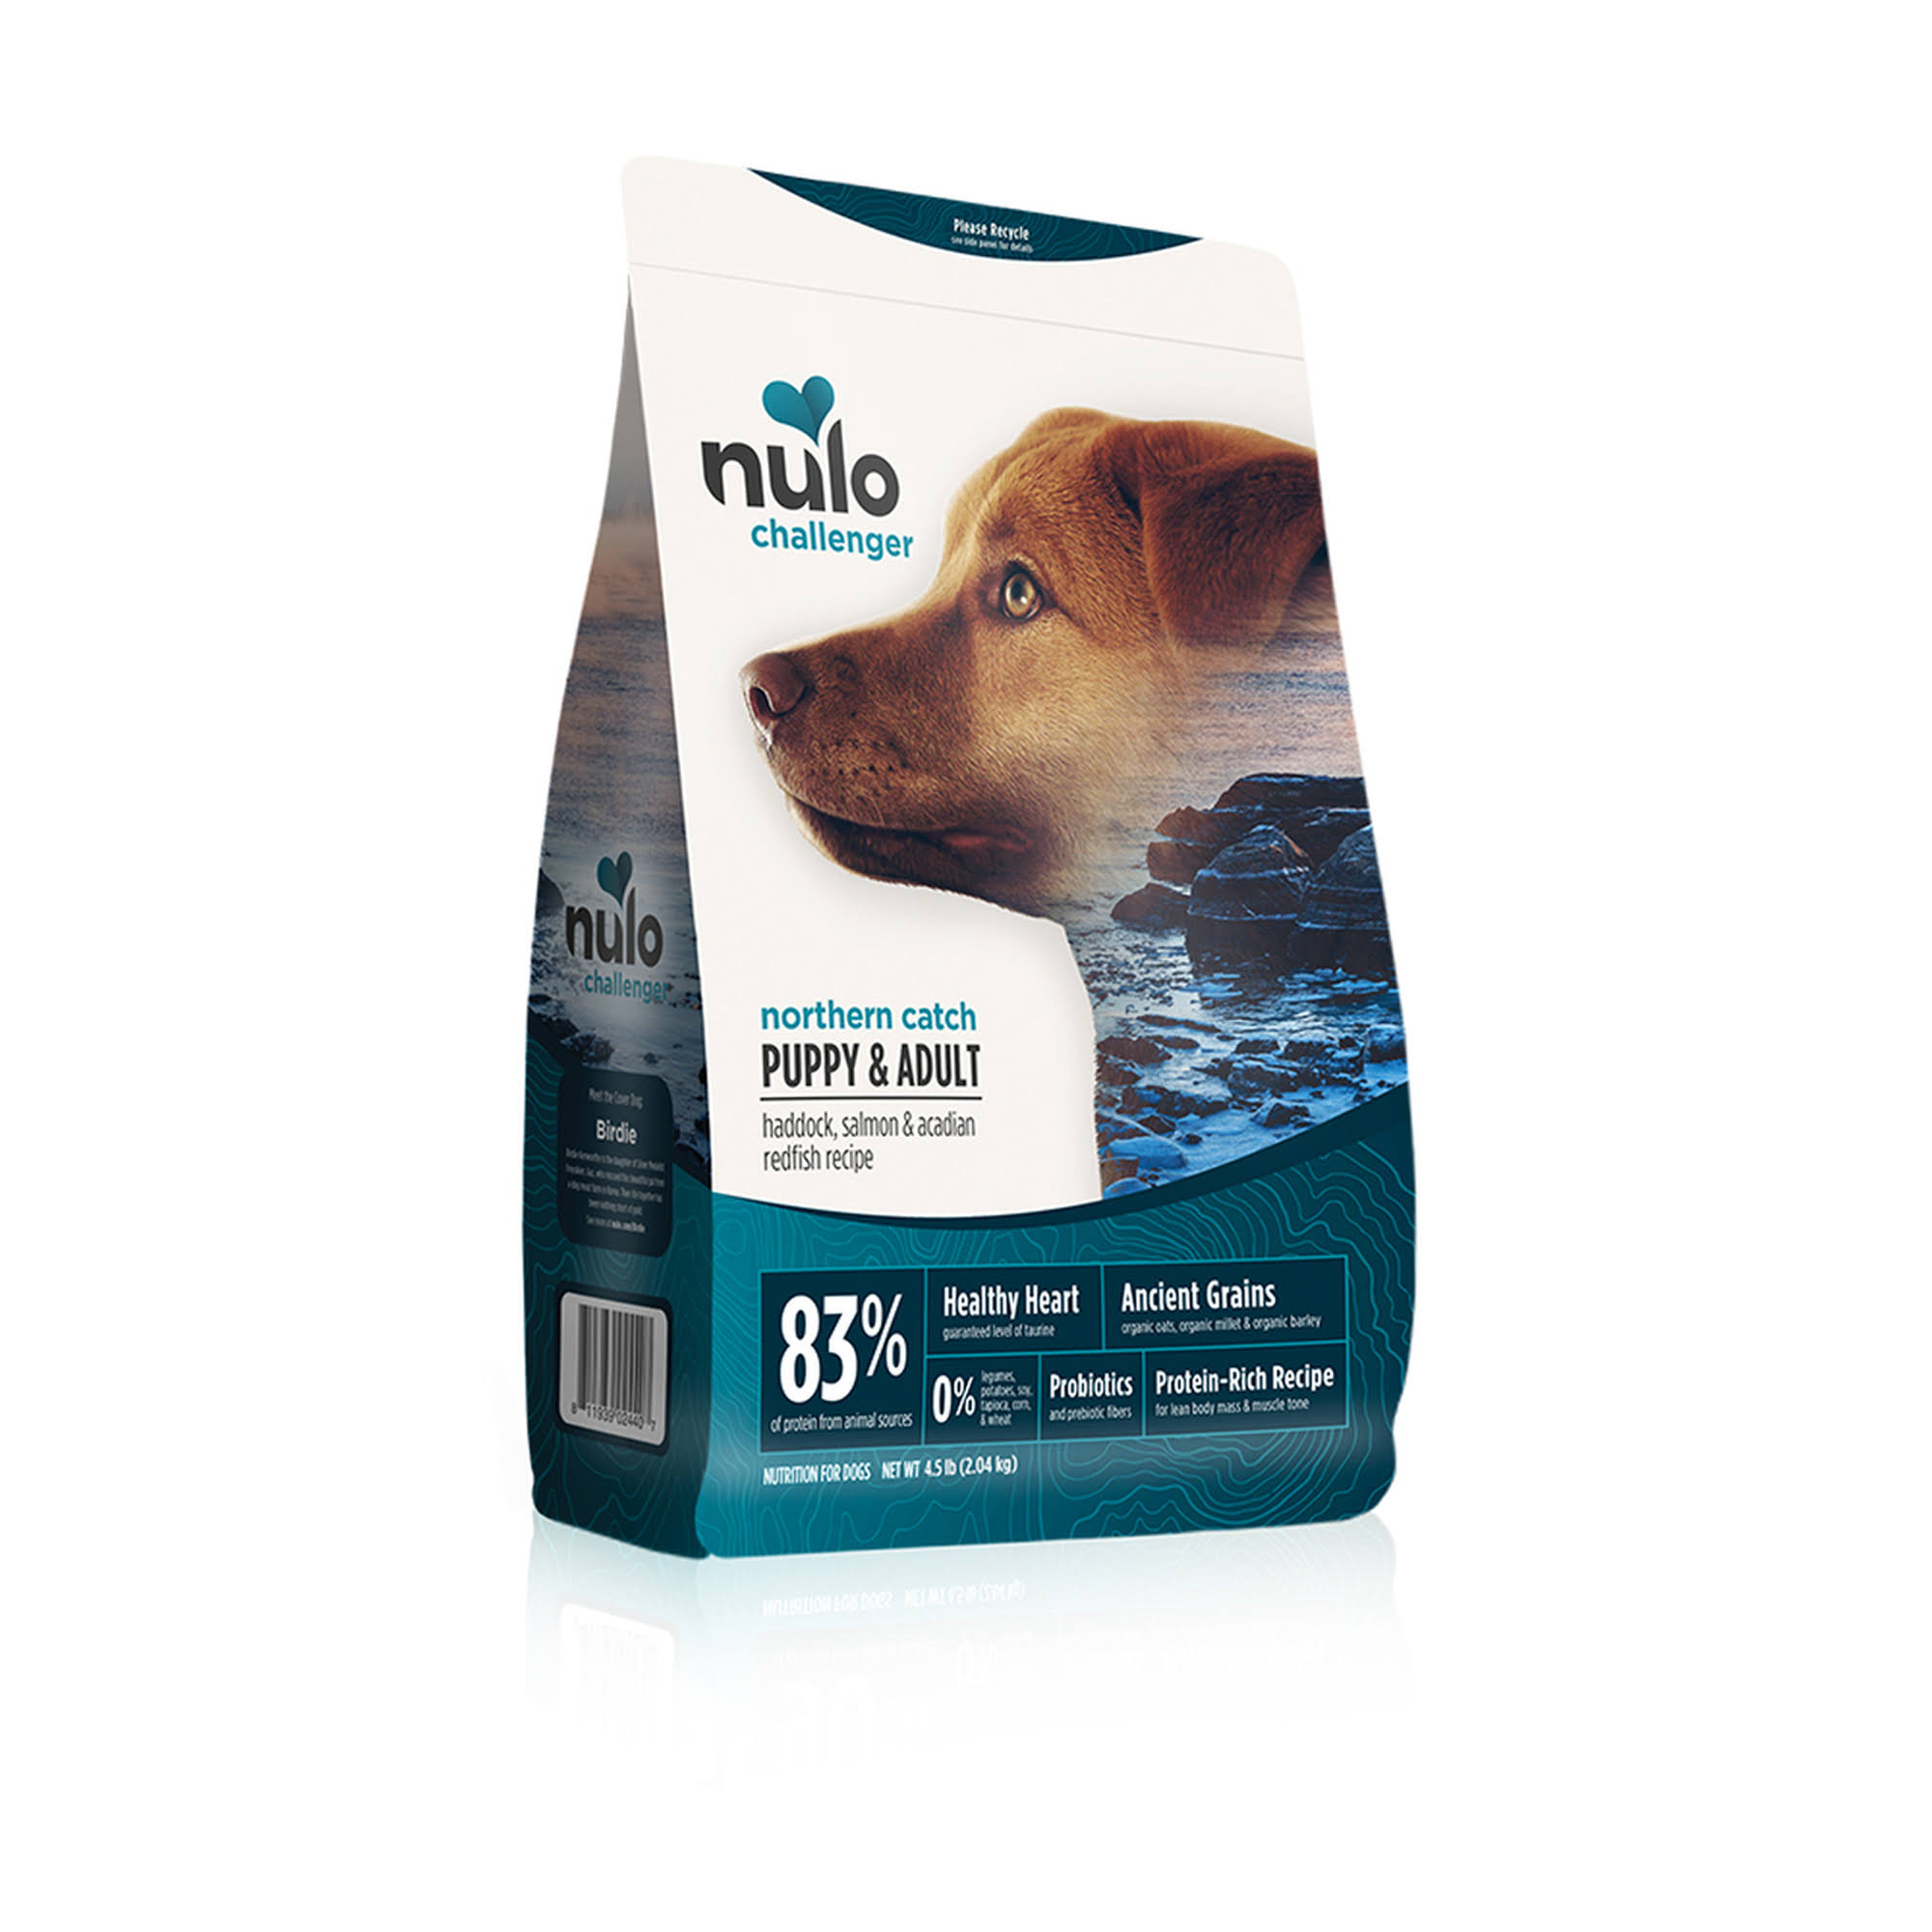 Nulo Challenger Northern Catch Small Breed Haddock, Salmon & Redfish Dry Dog Food, 4.5 Pounds